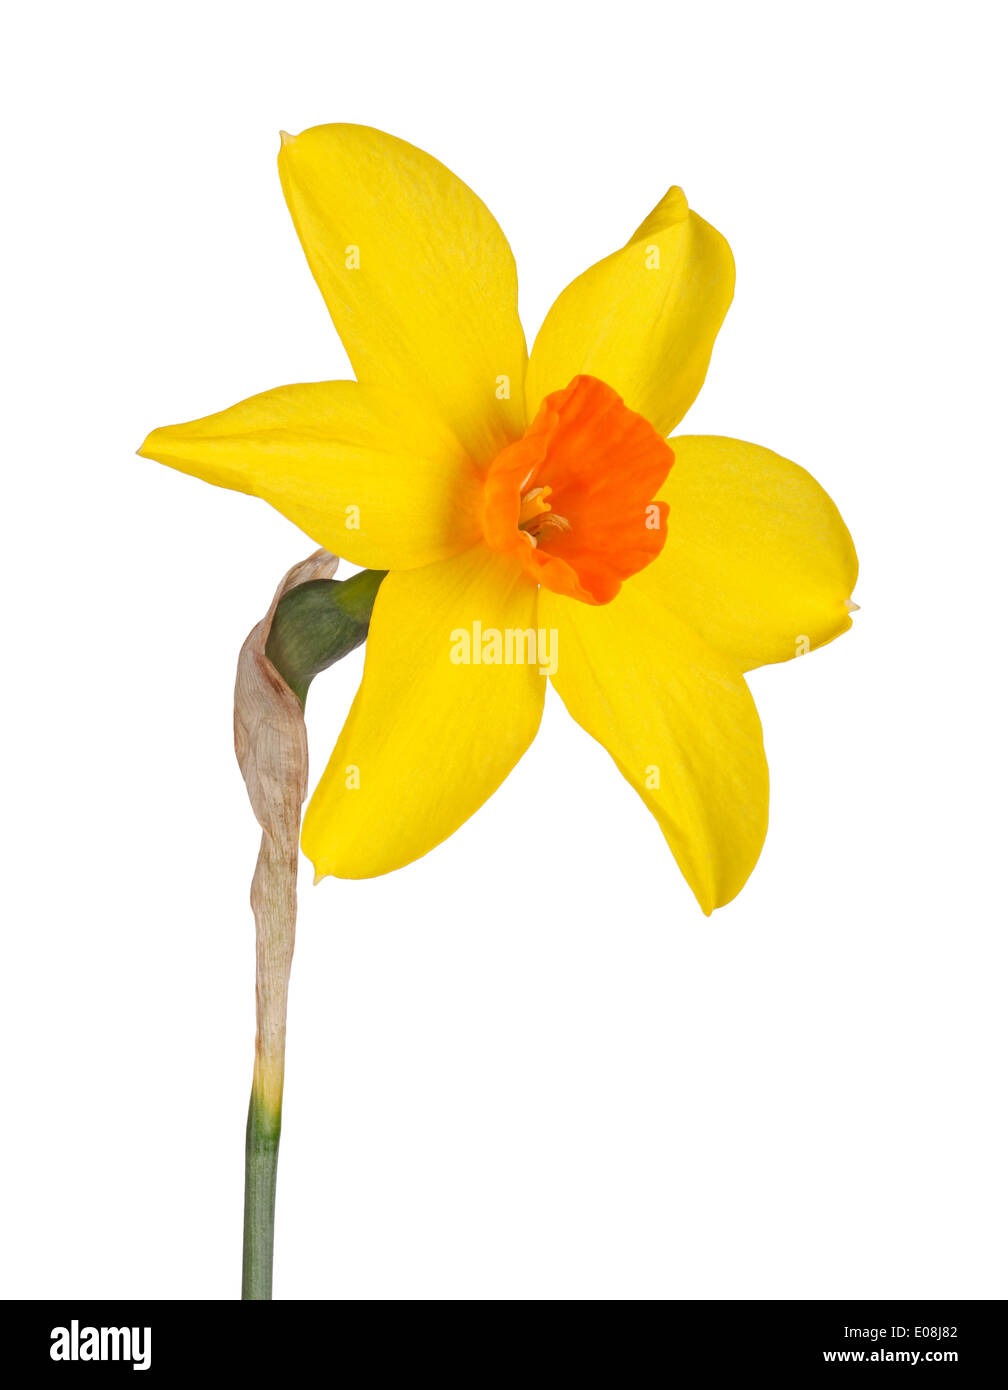 Single flower and stem of the yellow and red, small-cup daffodil cultivar Starbrook isolated against a white background Stock Photo